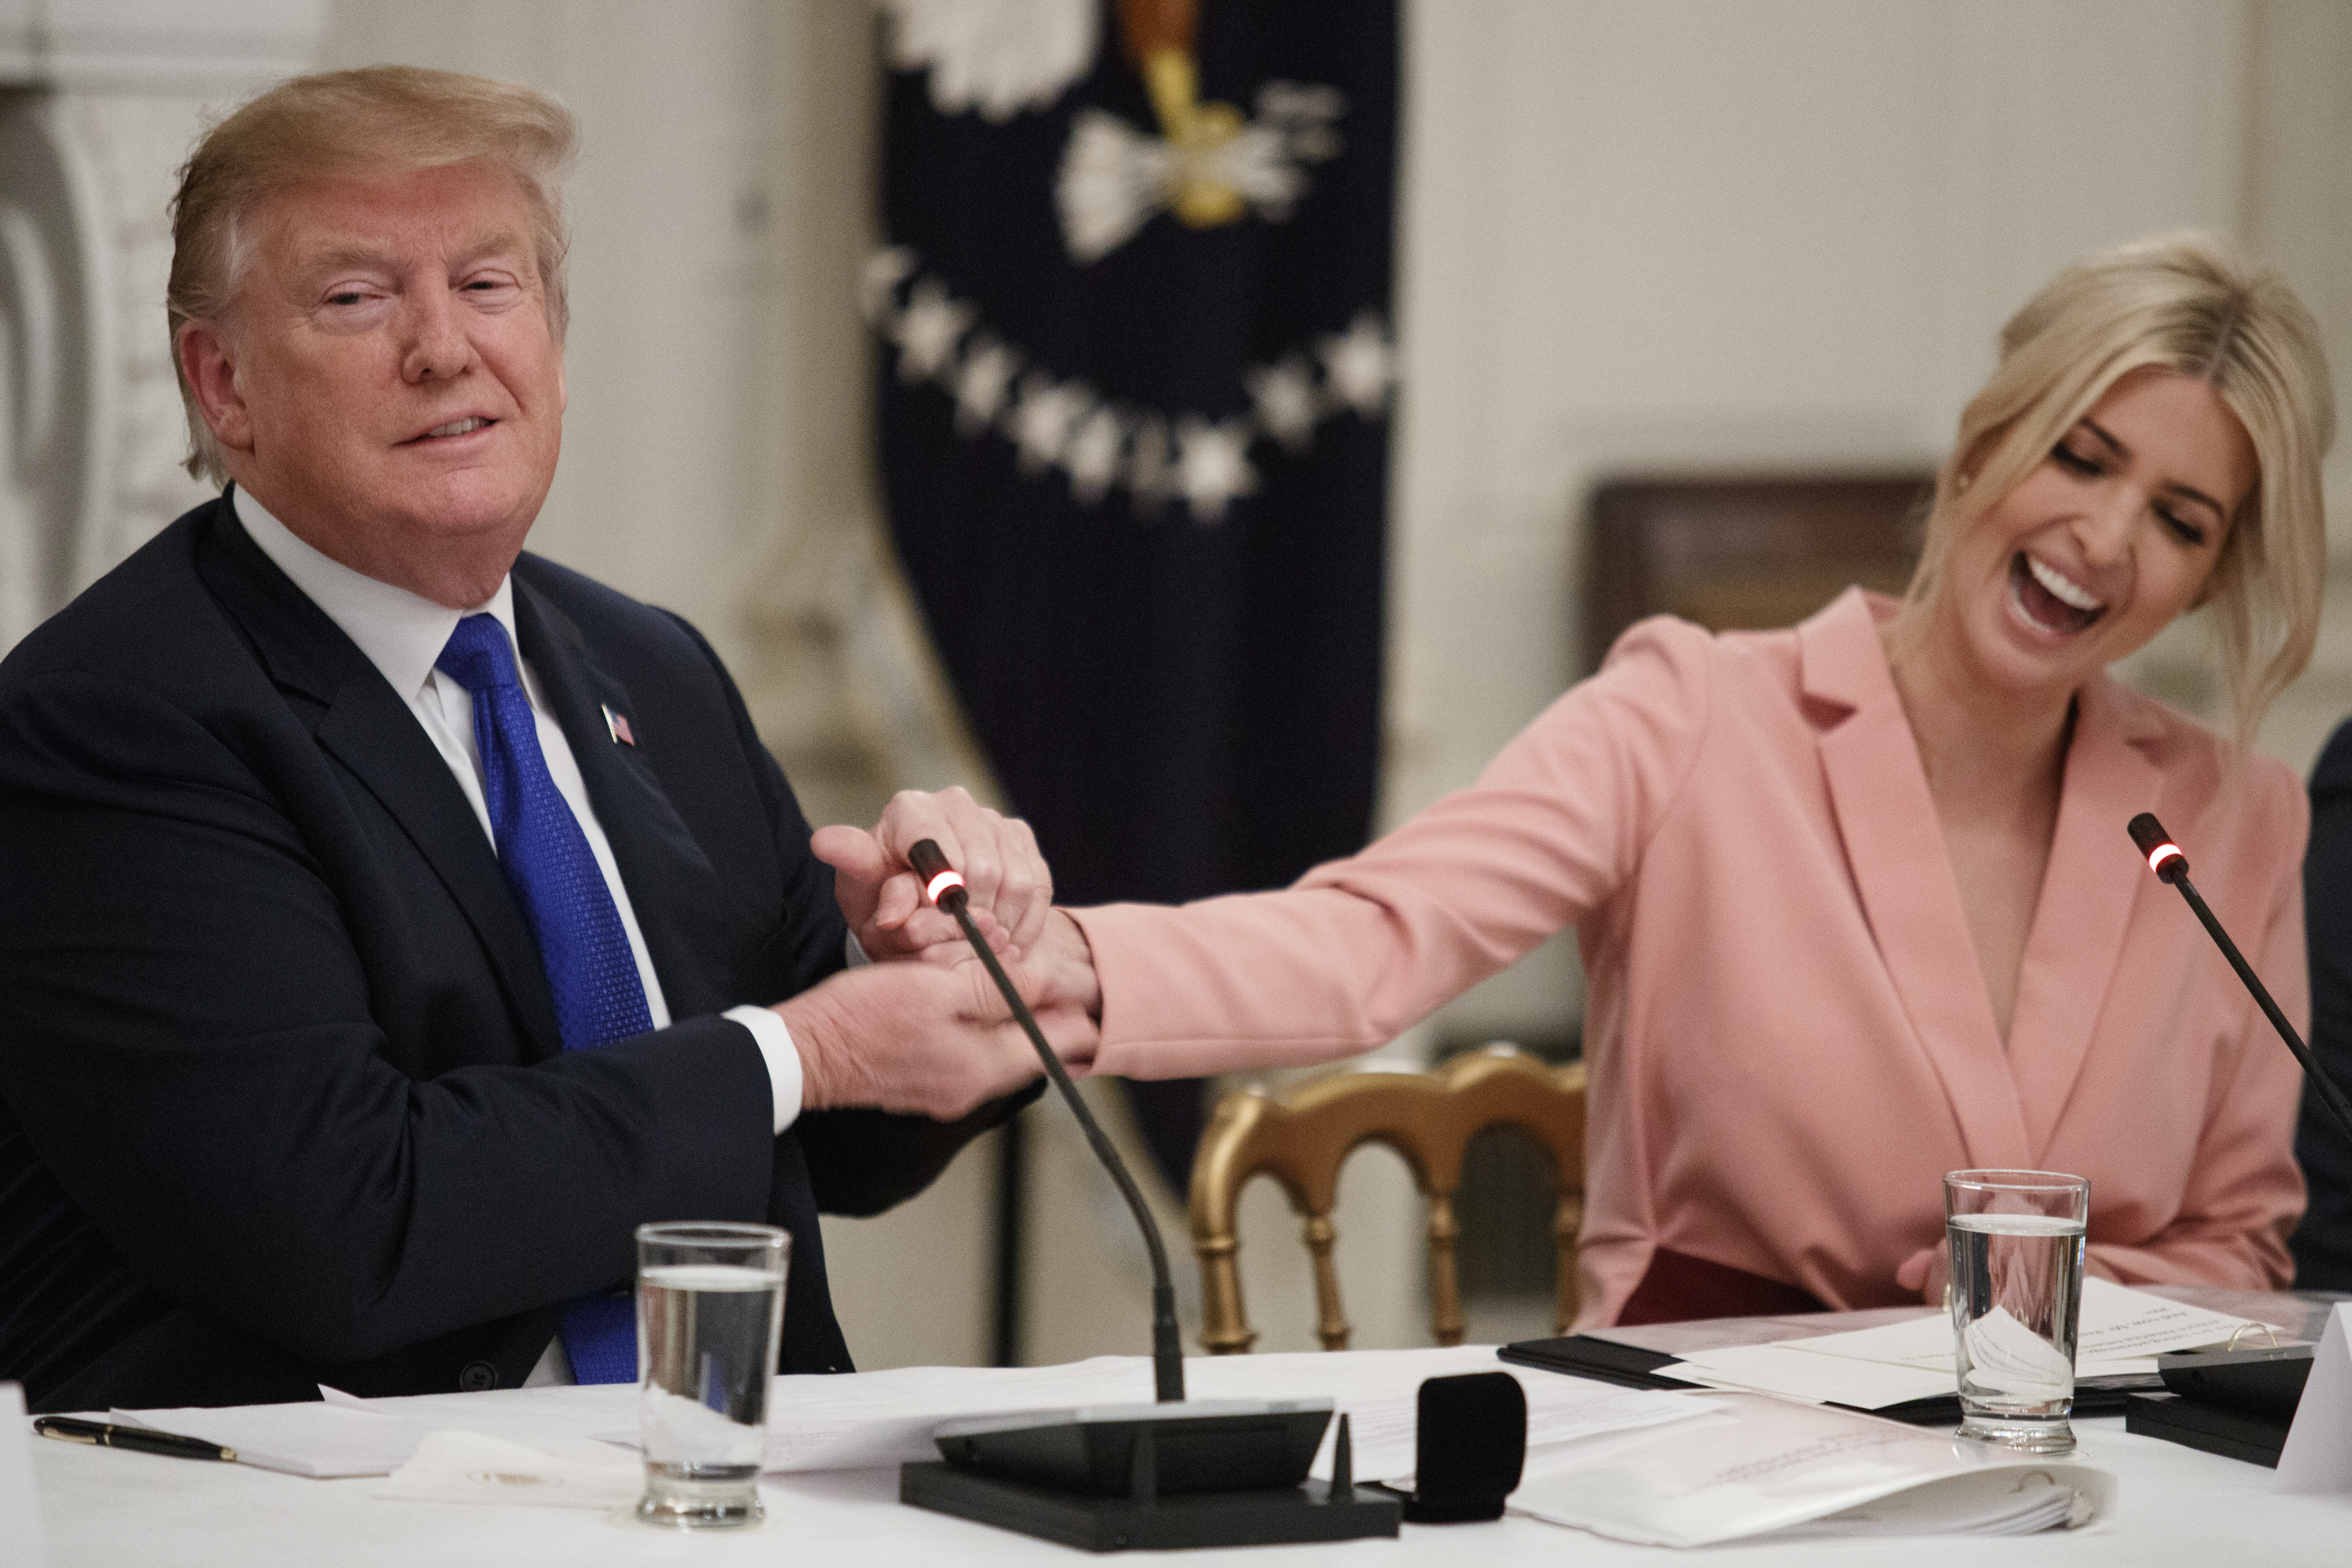 WASHINGTON, DC - MARCH 06: President Donald Trump shakes the had of his daughter and advisor, Ivanka Trump during a meeting with the American Workforce Policy Advisory Board inside the State Dining Room of the White House on March 6, 2019 in Washington, DC. The board, co-chaired by Ivanka and Commerce Secretary Wilbur Ross, is tasked with developing a strategy to revamp the U.S. workforce for well-paid, in-demand jobs and with promoting private-sector investments in workers. (Photo by Tom Brenner/Getty Images)